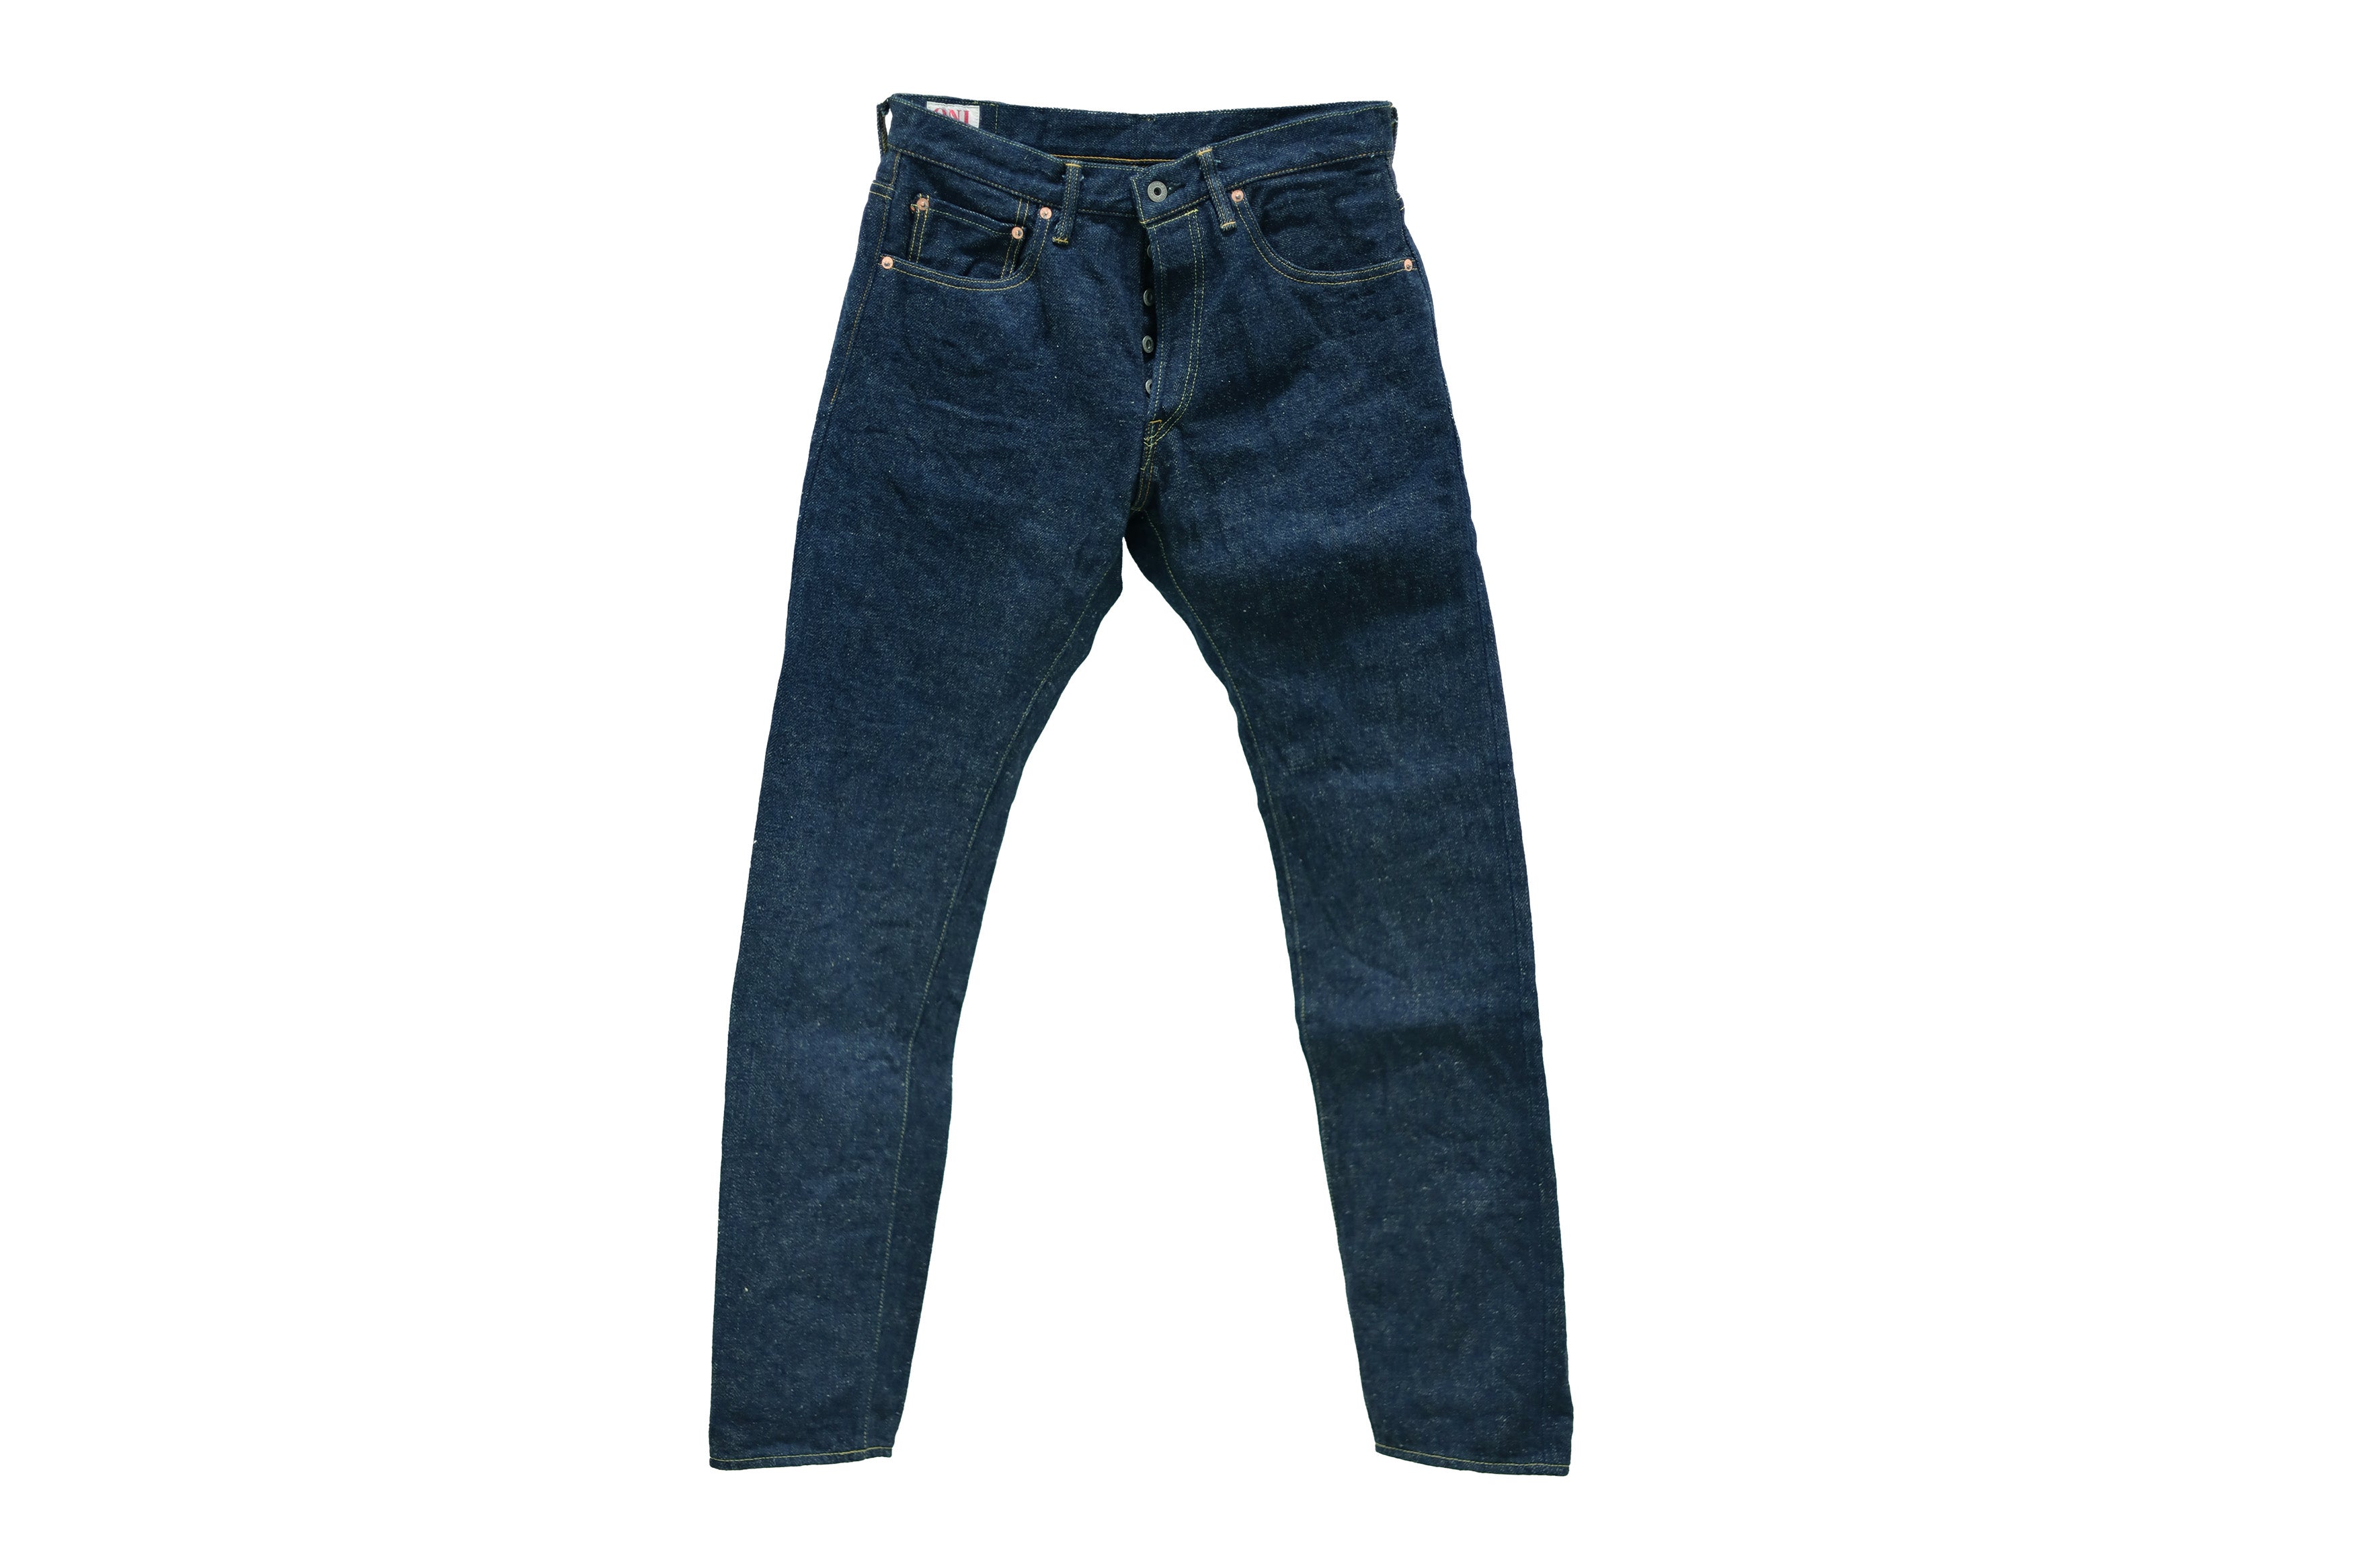 The Unbranded Brand Jeans, Page 86